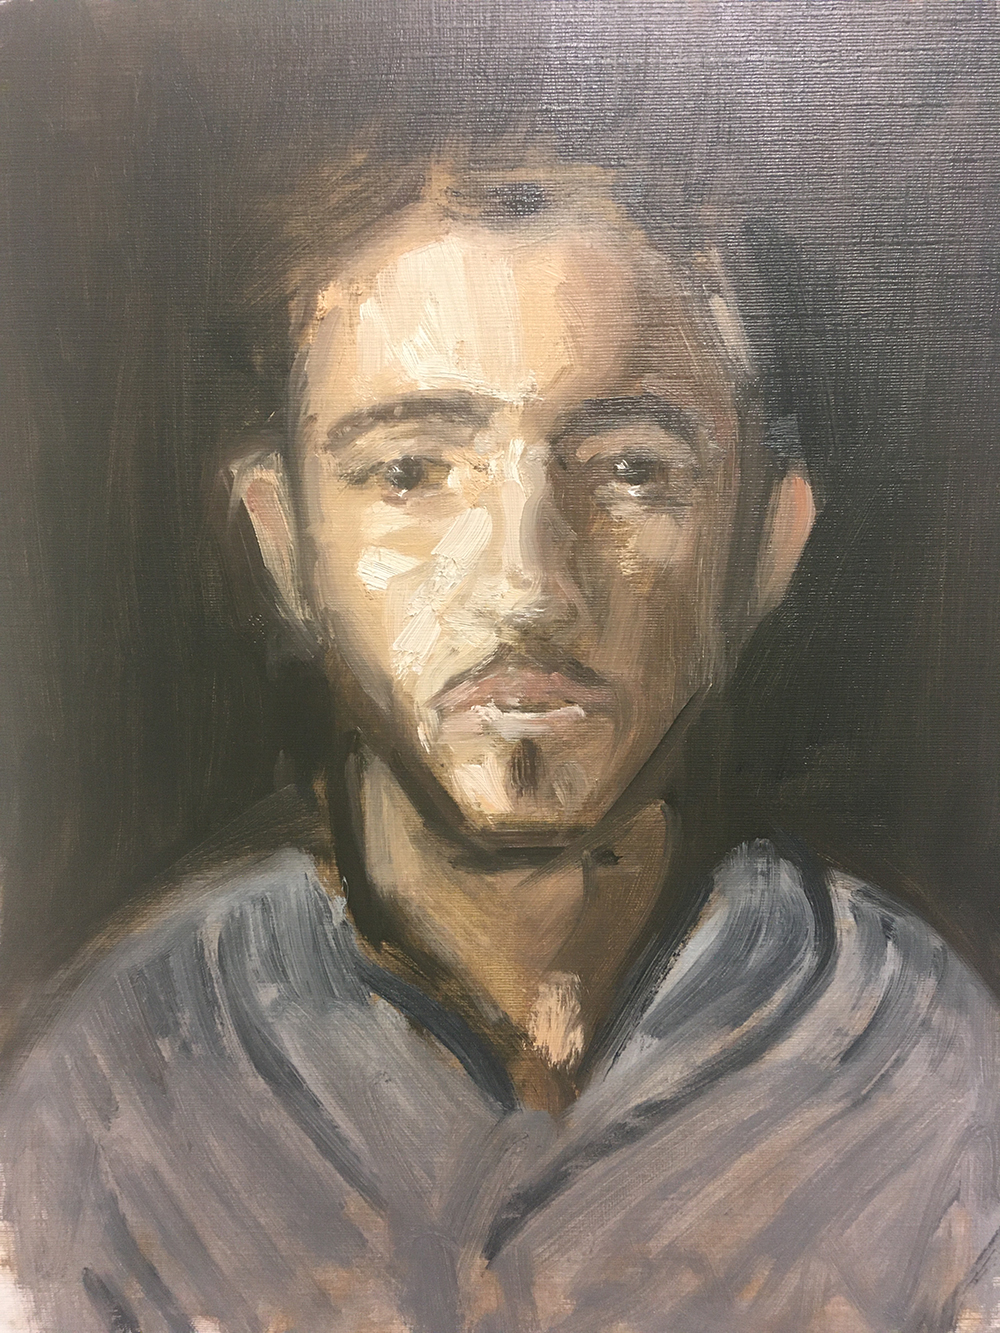 Loosely Painting an Oil Portrait Using a Limited Palette